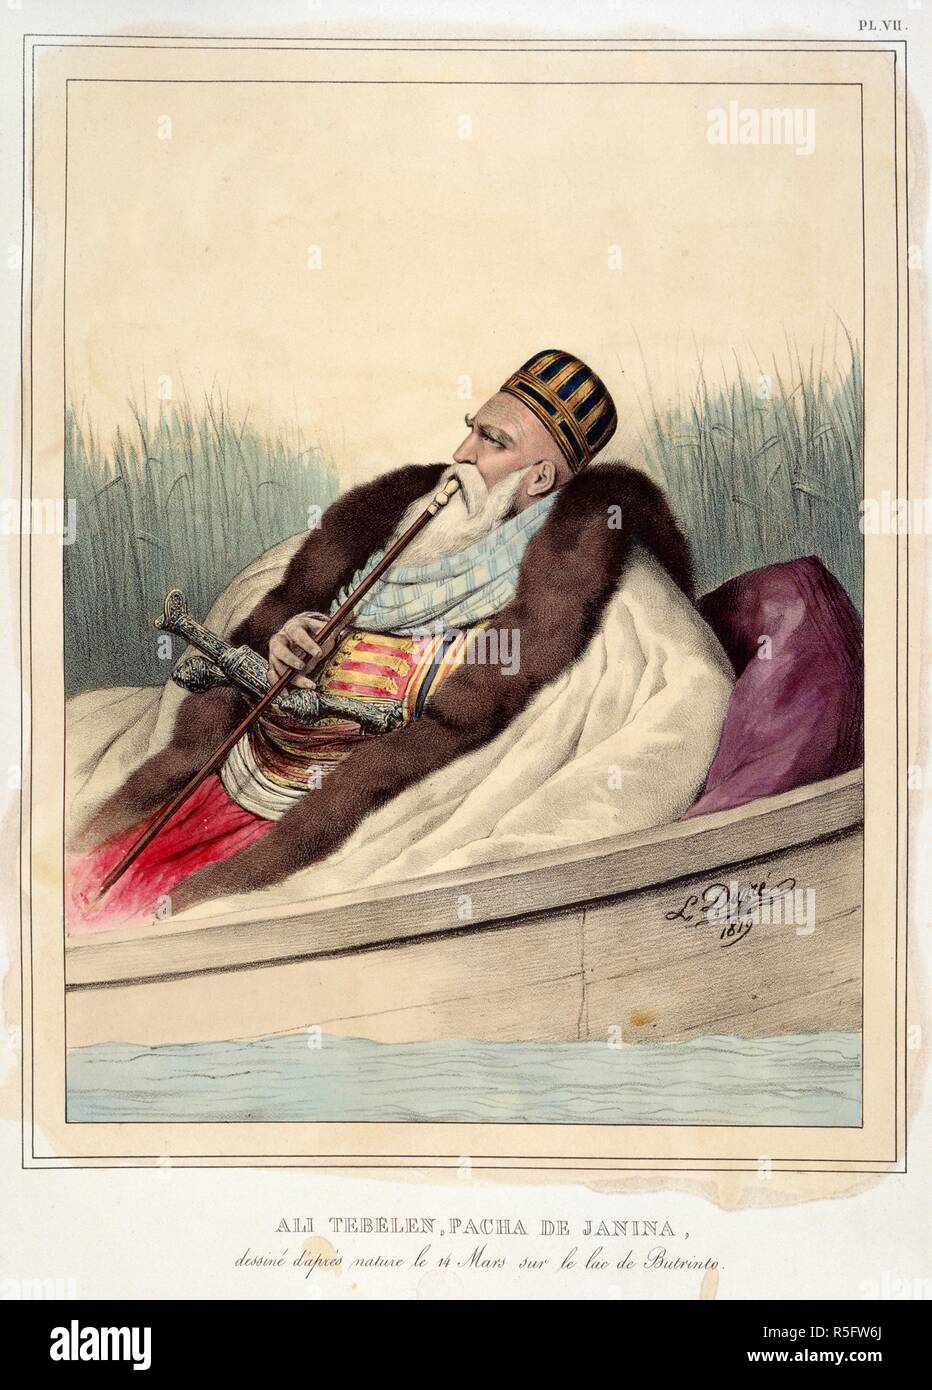 Ali Tebelen, Pacha de Janina. Voyage Ã  AthÃ¨nes et Ã  constantinople; ou collectio. Paris, 1825. Ali Pasha, surnamed Arslan, also known as the Lion of Janina. Referred to as the 'Mohammedan Bonaparte'. (c.1741-1822). Portrait. Born in Tepeleni, Albania. A former brigand, he maintained a court and negotiated with both Great Britain and France. Deposed and put to death.  Image taken from Voyage Ã  AthÃ¨nes et Ã  constantinople; ou collection de Portraits, de Vues et de Costumes Grecs et Ottomans.  Originally published/produced in Paris, 1825. . Source: Tab.1237.a, plate VII. Language: French. Stock Photo